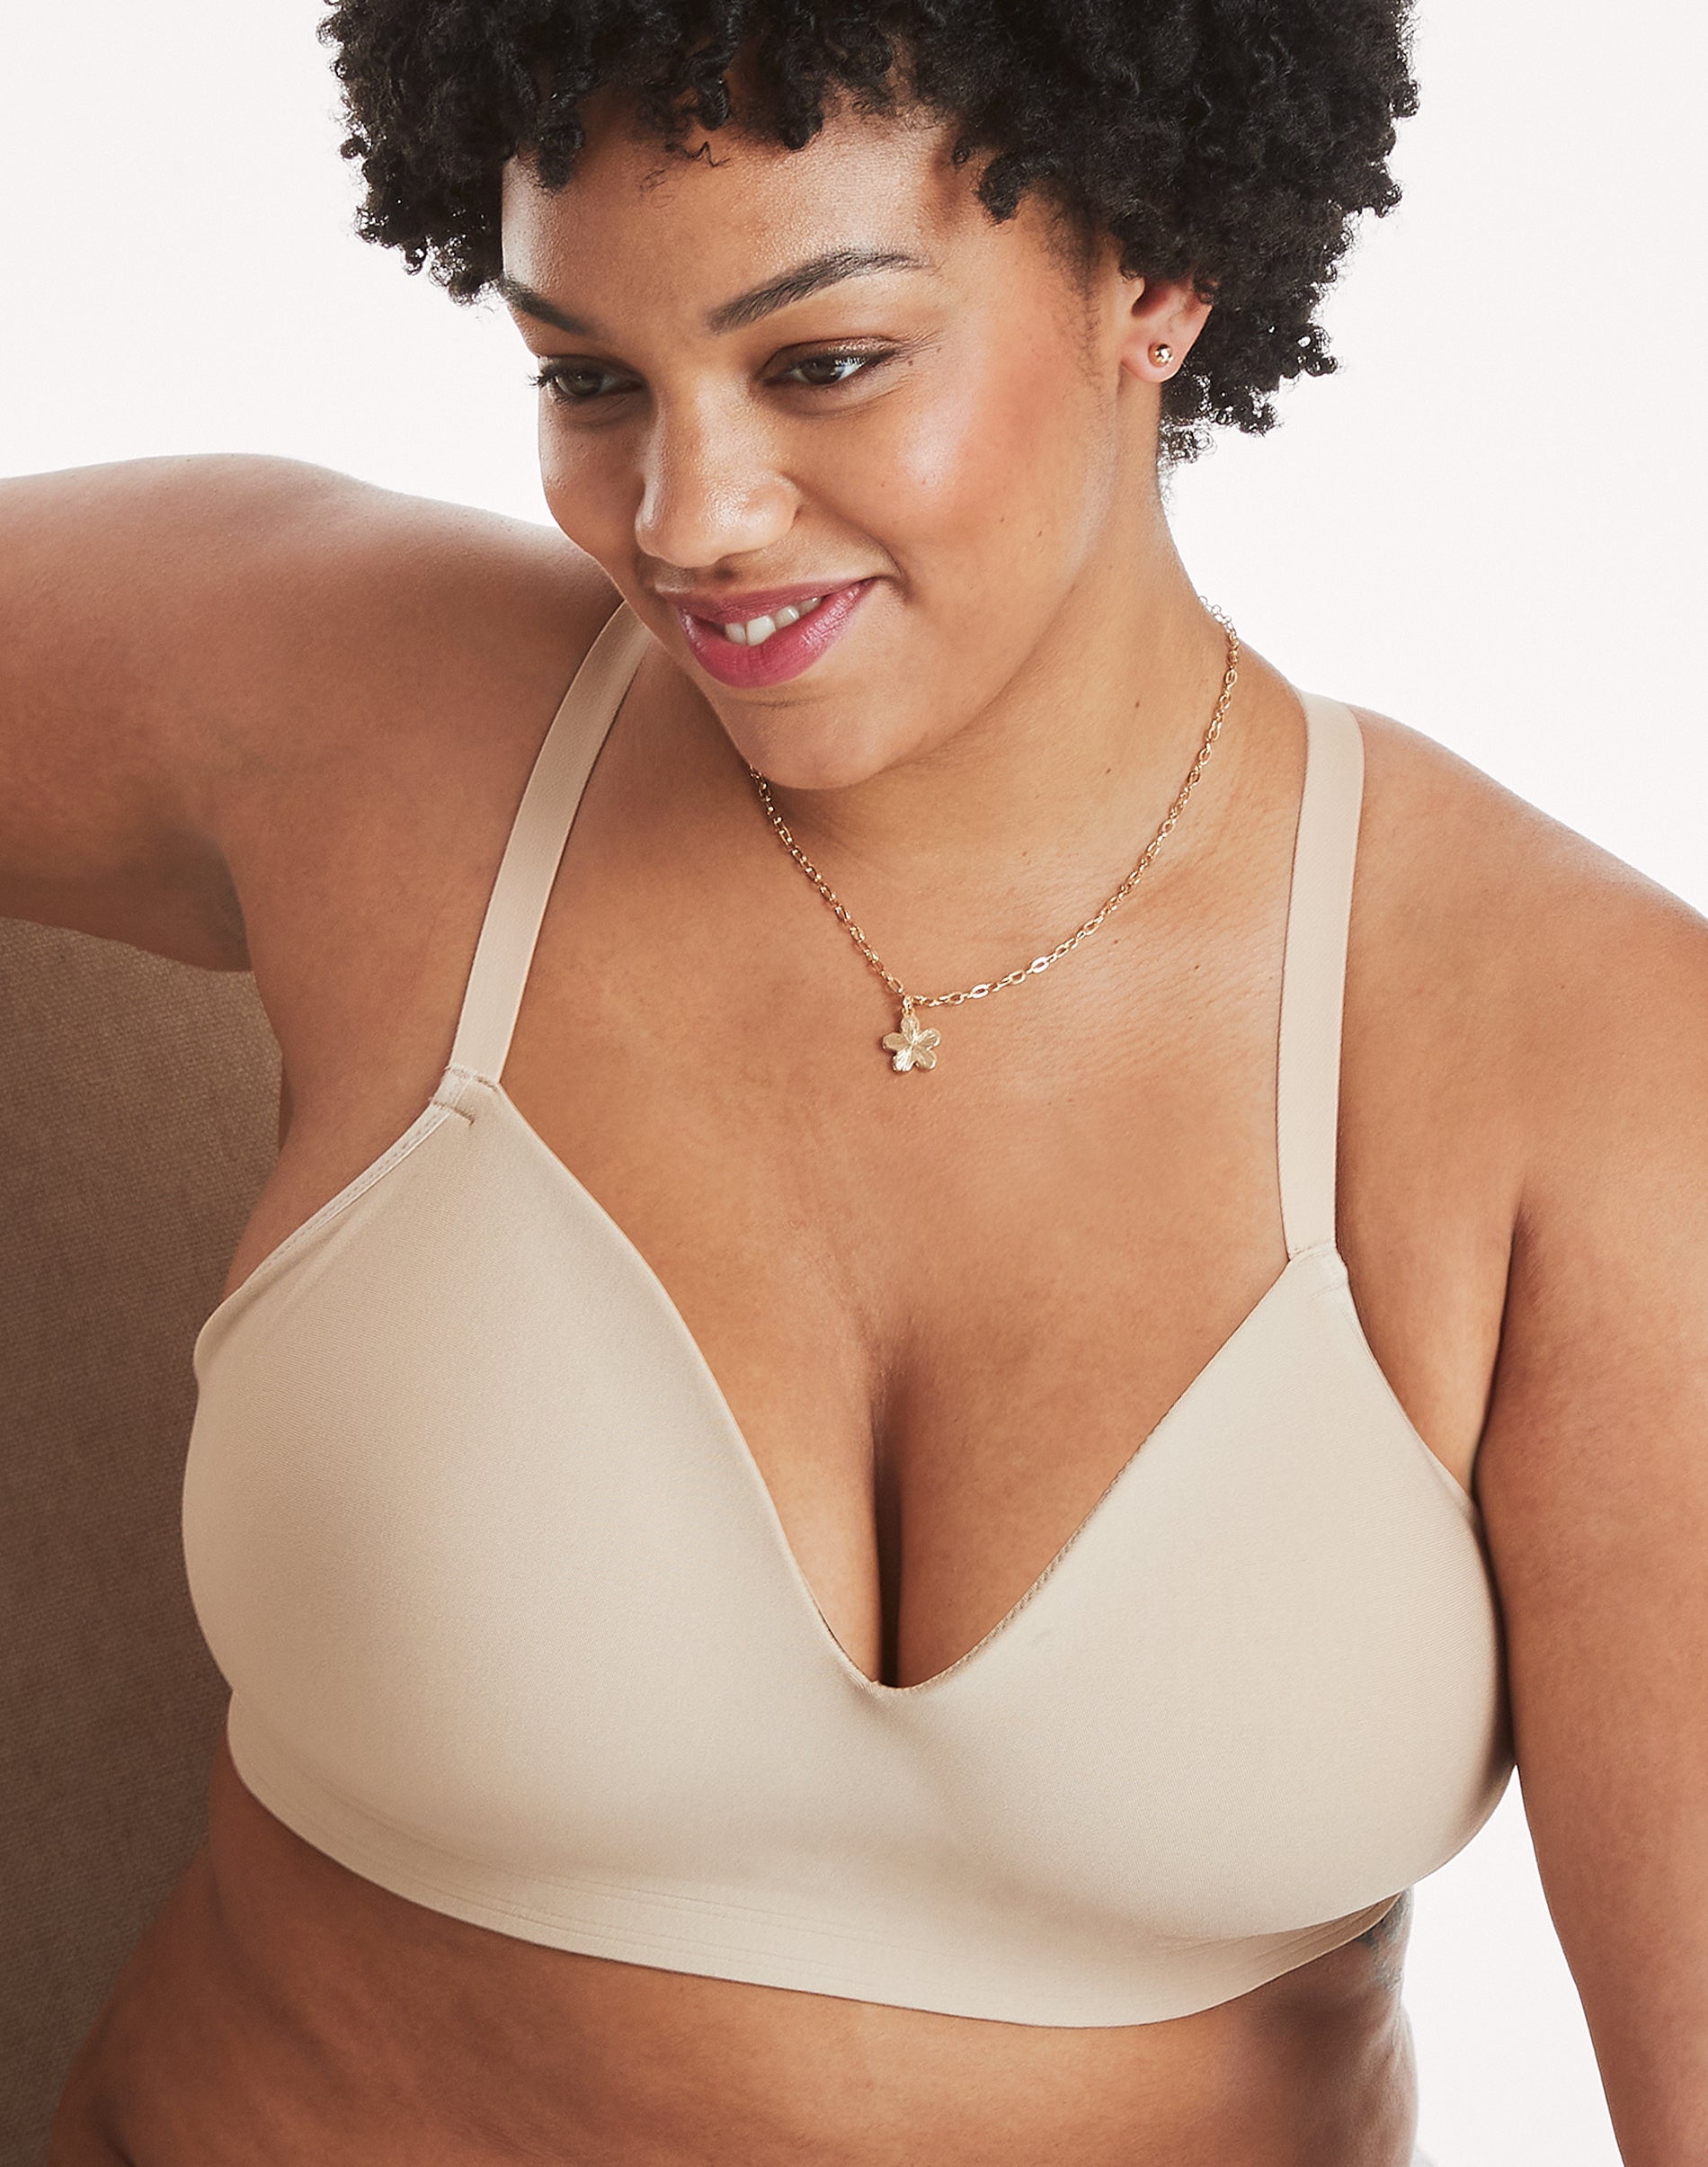 Hanes Women's Full Coverage SmoothTec Band Unlined Wireless Bra